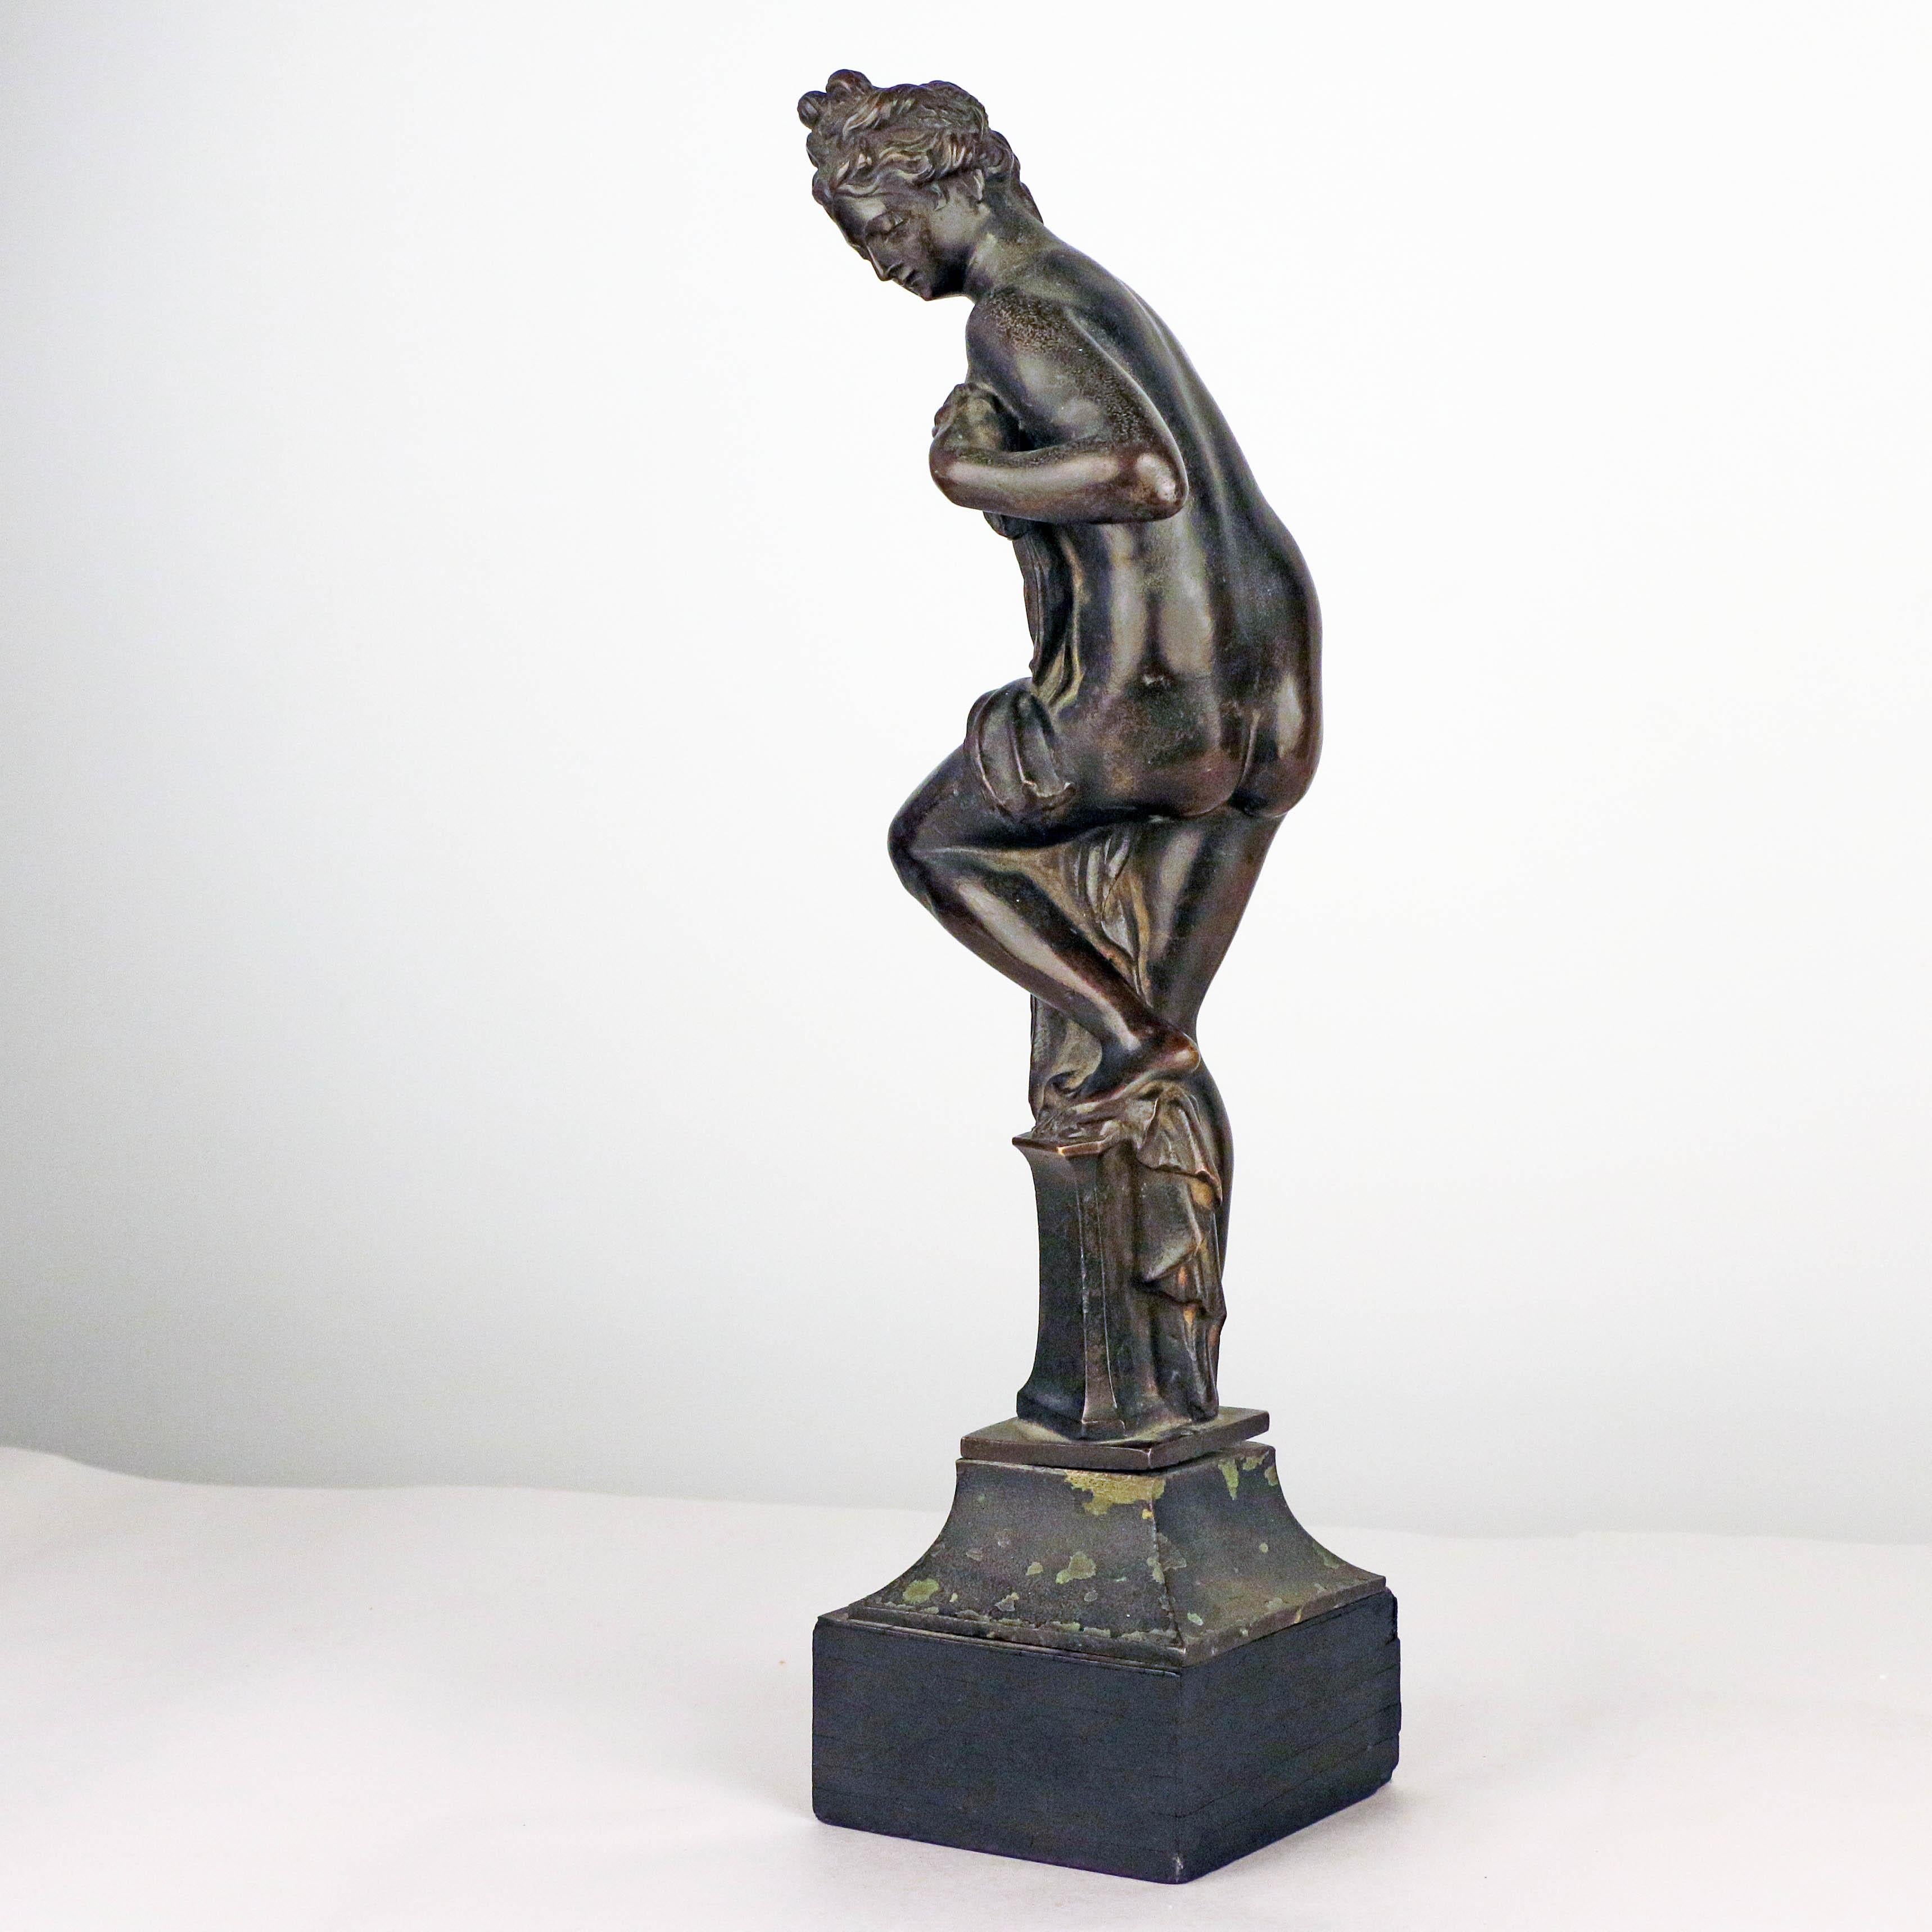 This charming reduction is indisputably antique. It has a wonderful patina, slightly disturbed at the raised heal and more shiney on her bottom (a result of whistful carressing, no doubt). It is offered mounted on a spelter shaped plinth with